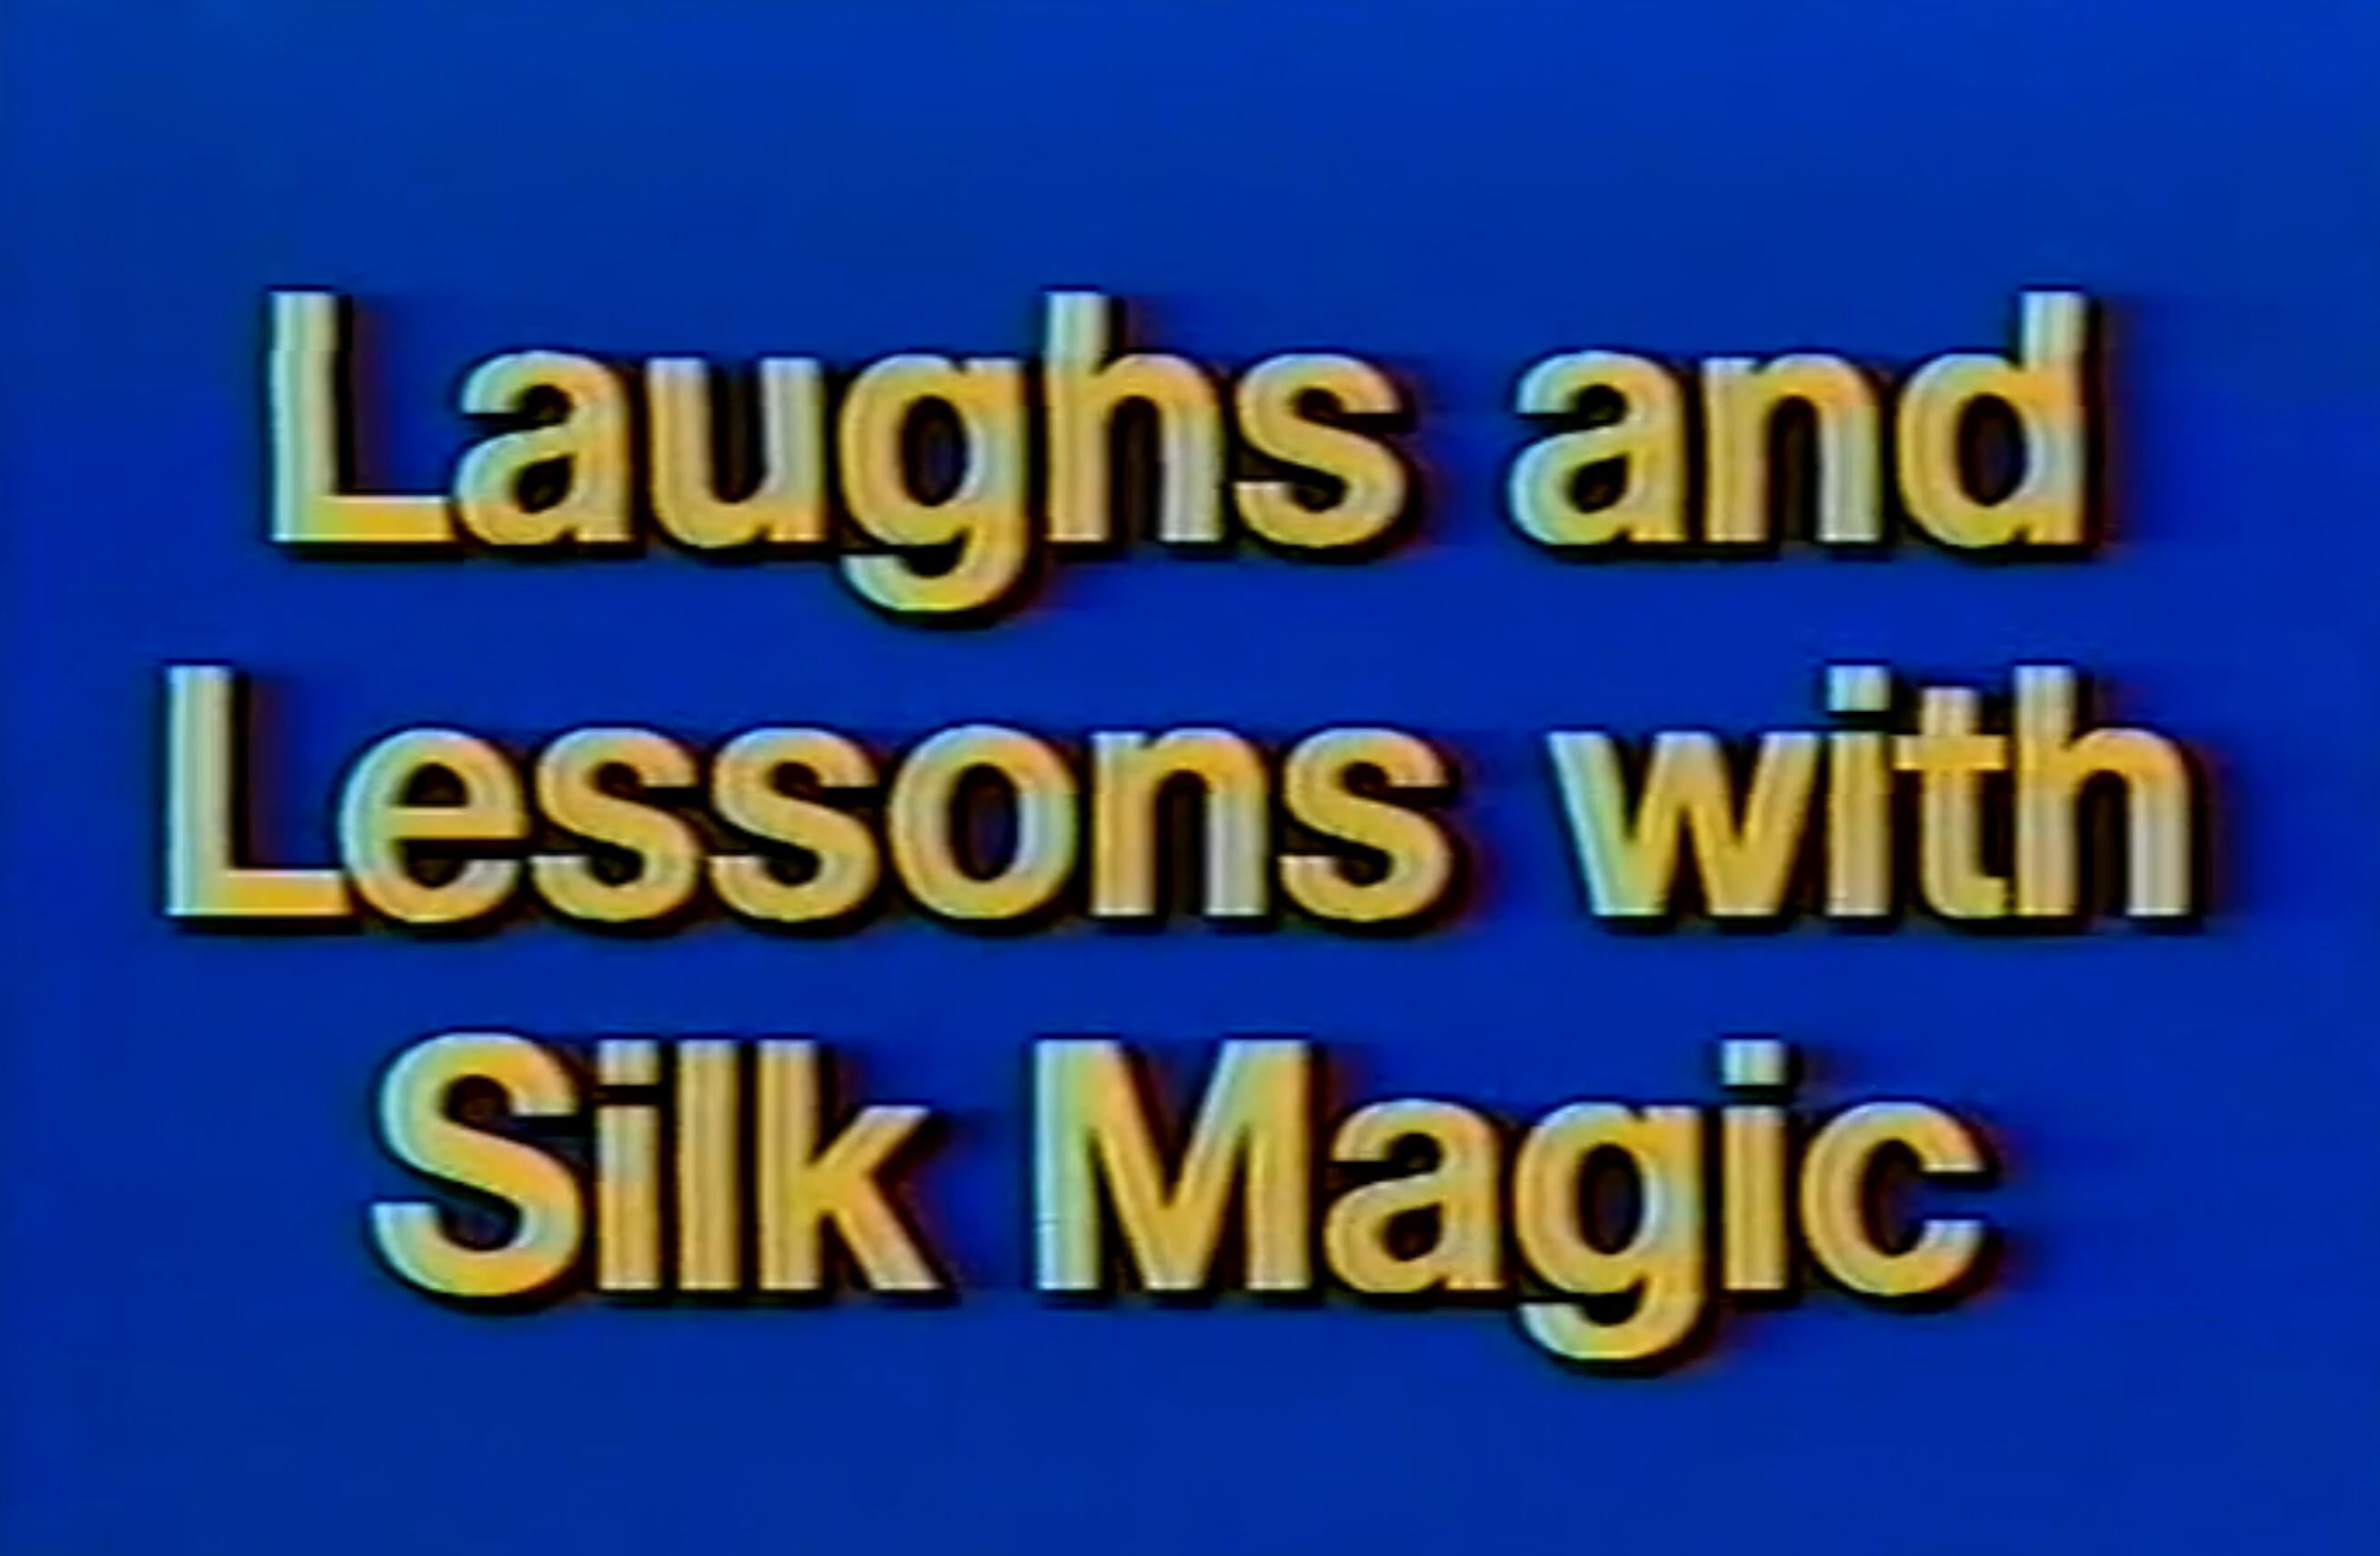 Duane Laflin - Laughs and Lessons with Silk Magic